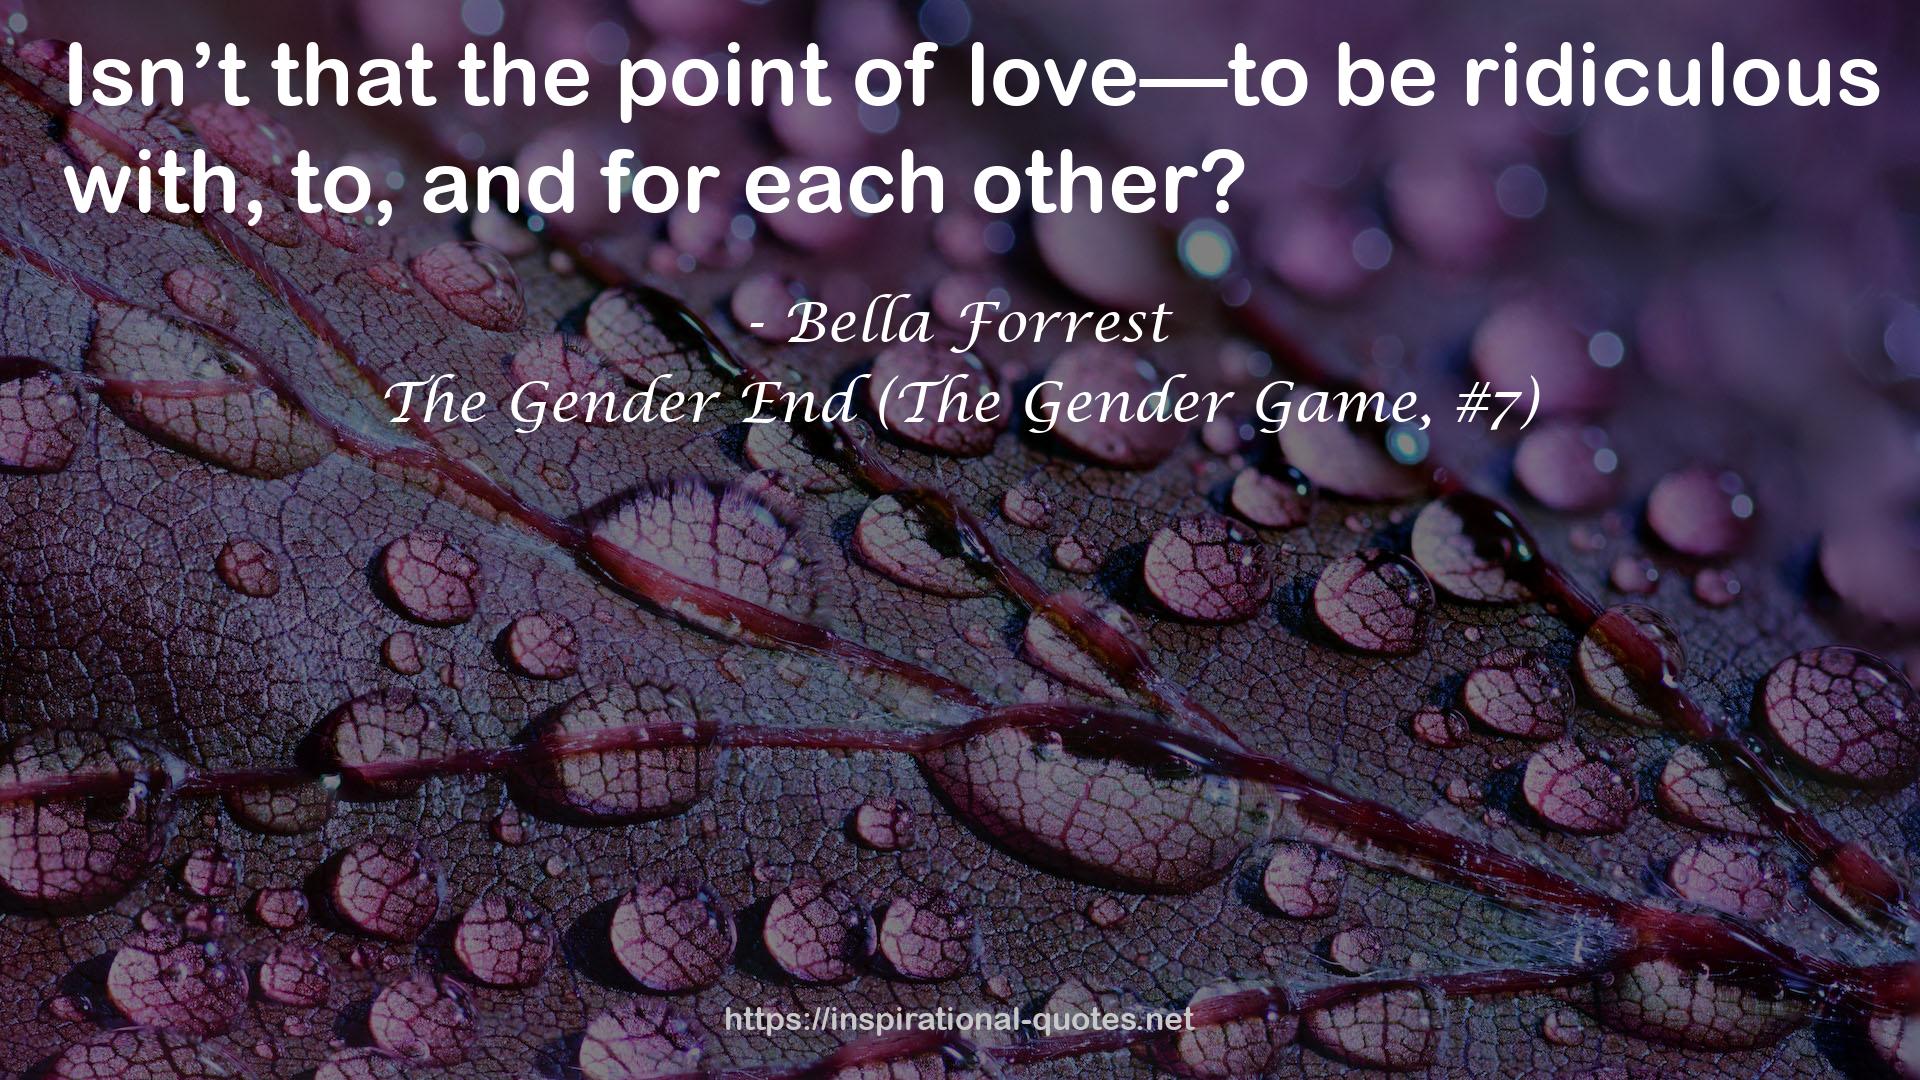 The Gender End (The Gender Game, #7) QUOTES